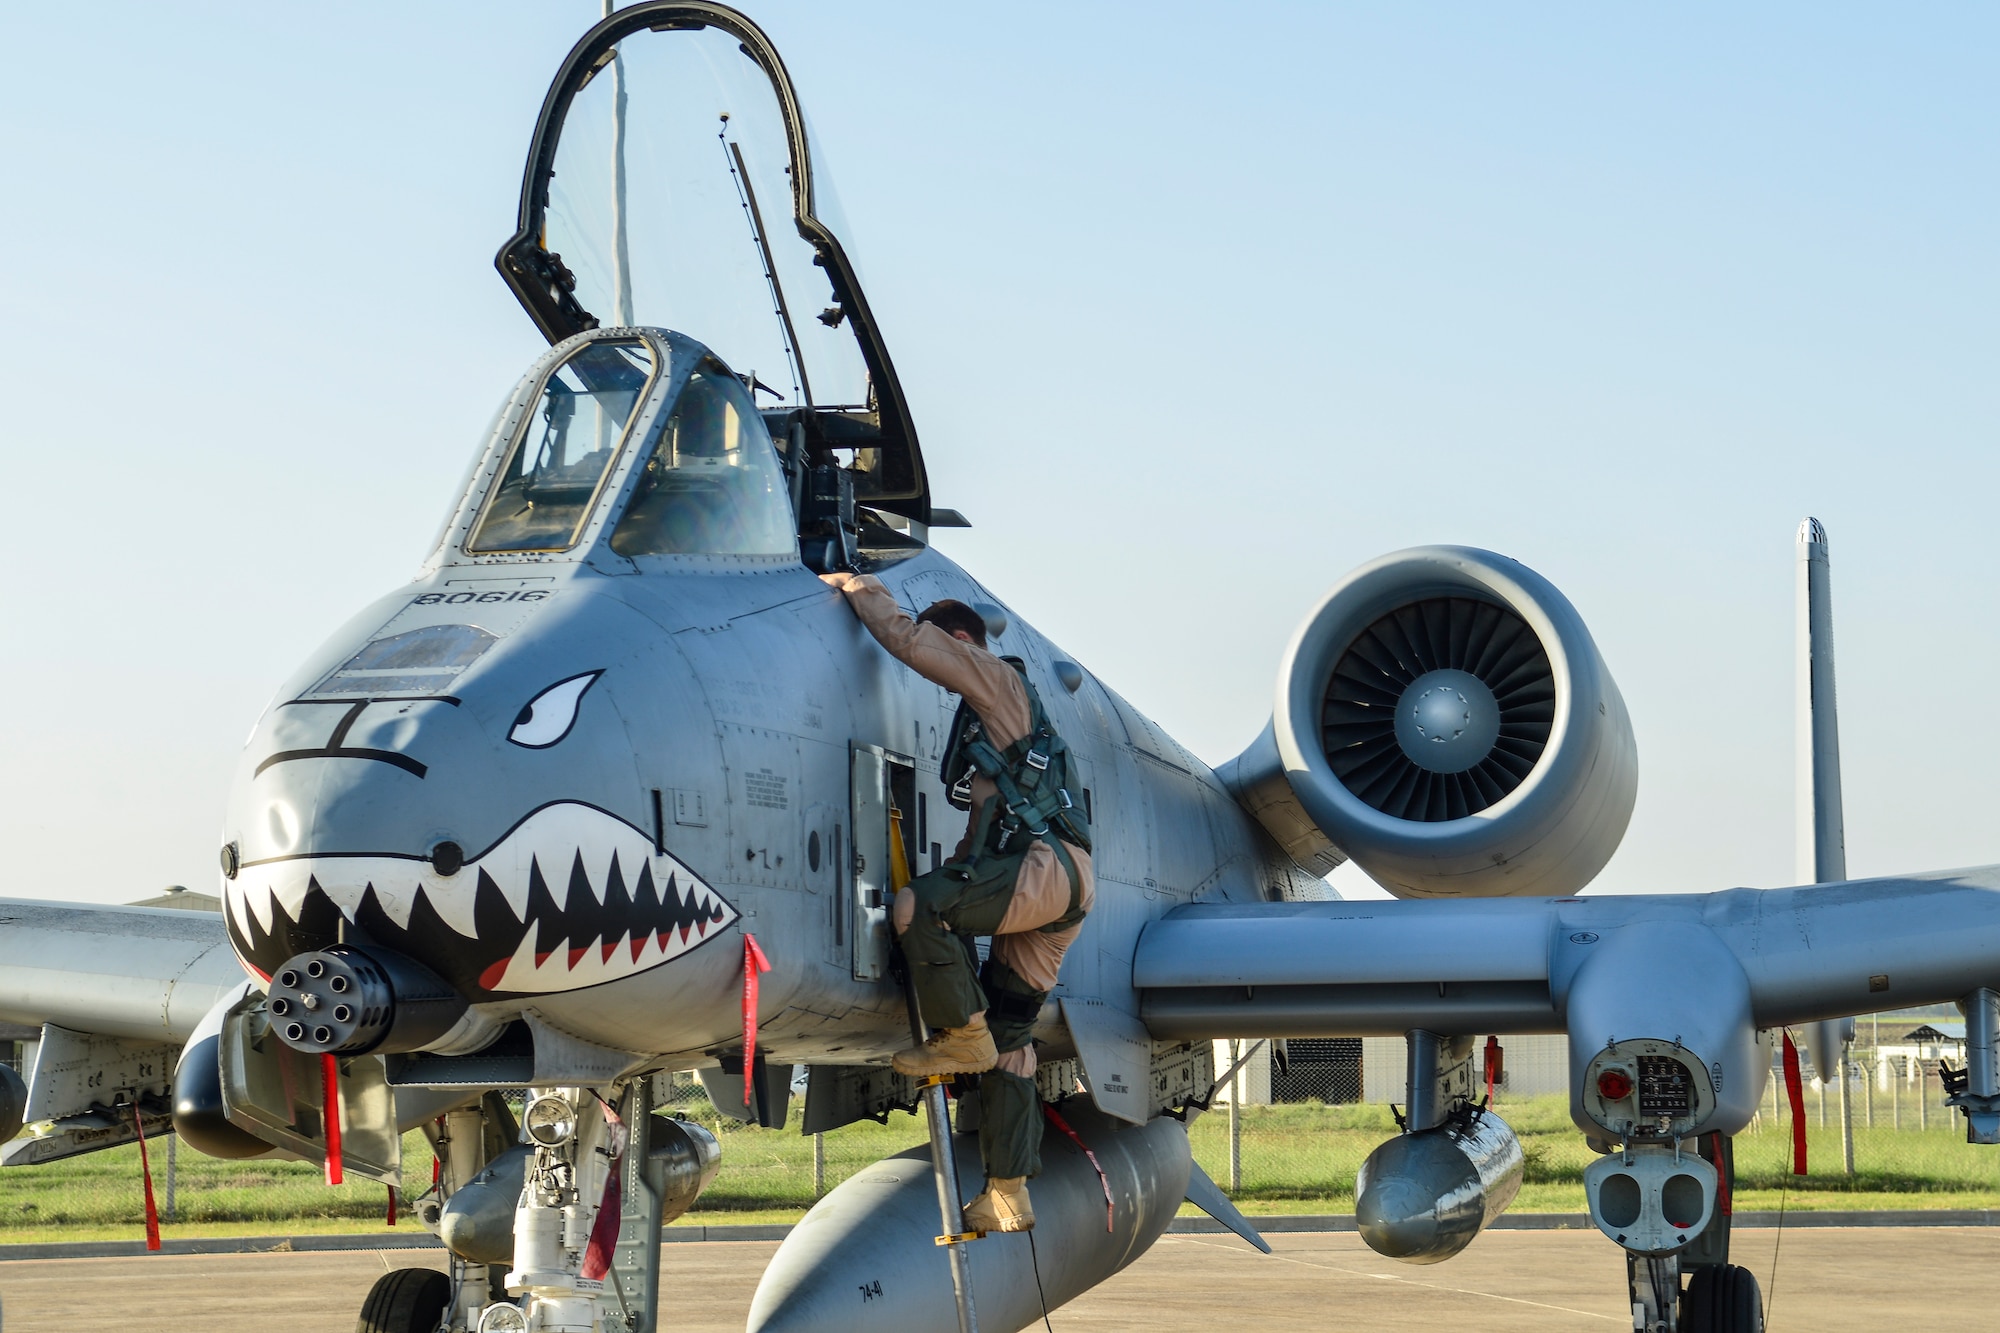 A U.S. Air Force pilot steps out of an A-10 Thunderbolt II attack aircraft shortly after arriving at Incirlik Air Base, Turkey Oct. 15, 2015. The 12 A-10 Thunderbolt IIs are deployed to Incirlik AB in support of Operation Inherent Resolve. The aircraft is deployed to Incirlik AB in an effort to enhance the international Coalition against ISIL. (U.S. Air Force photo by Airman 1st Class Cory W. Bush/Released)